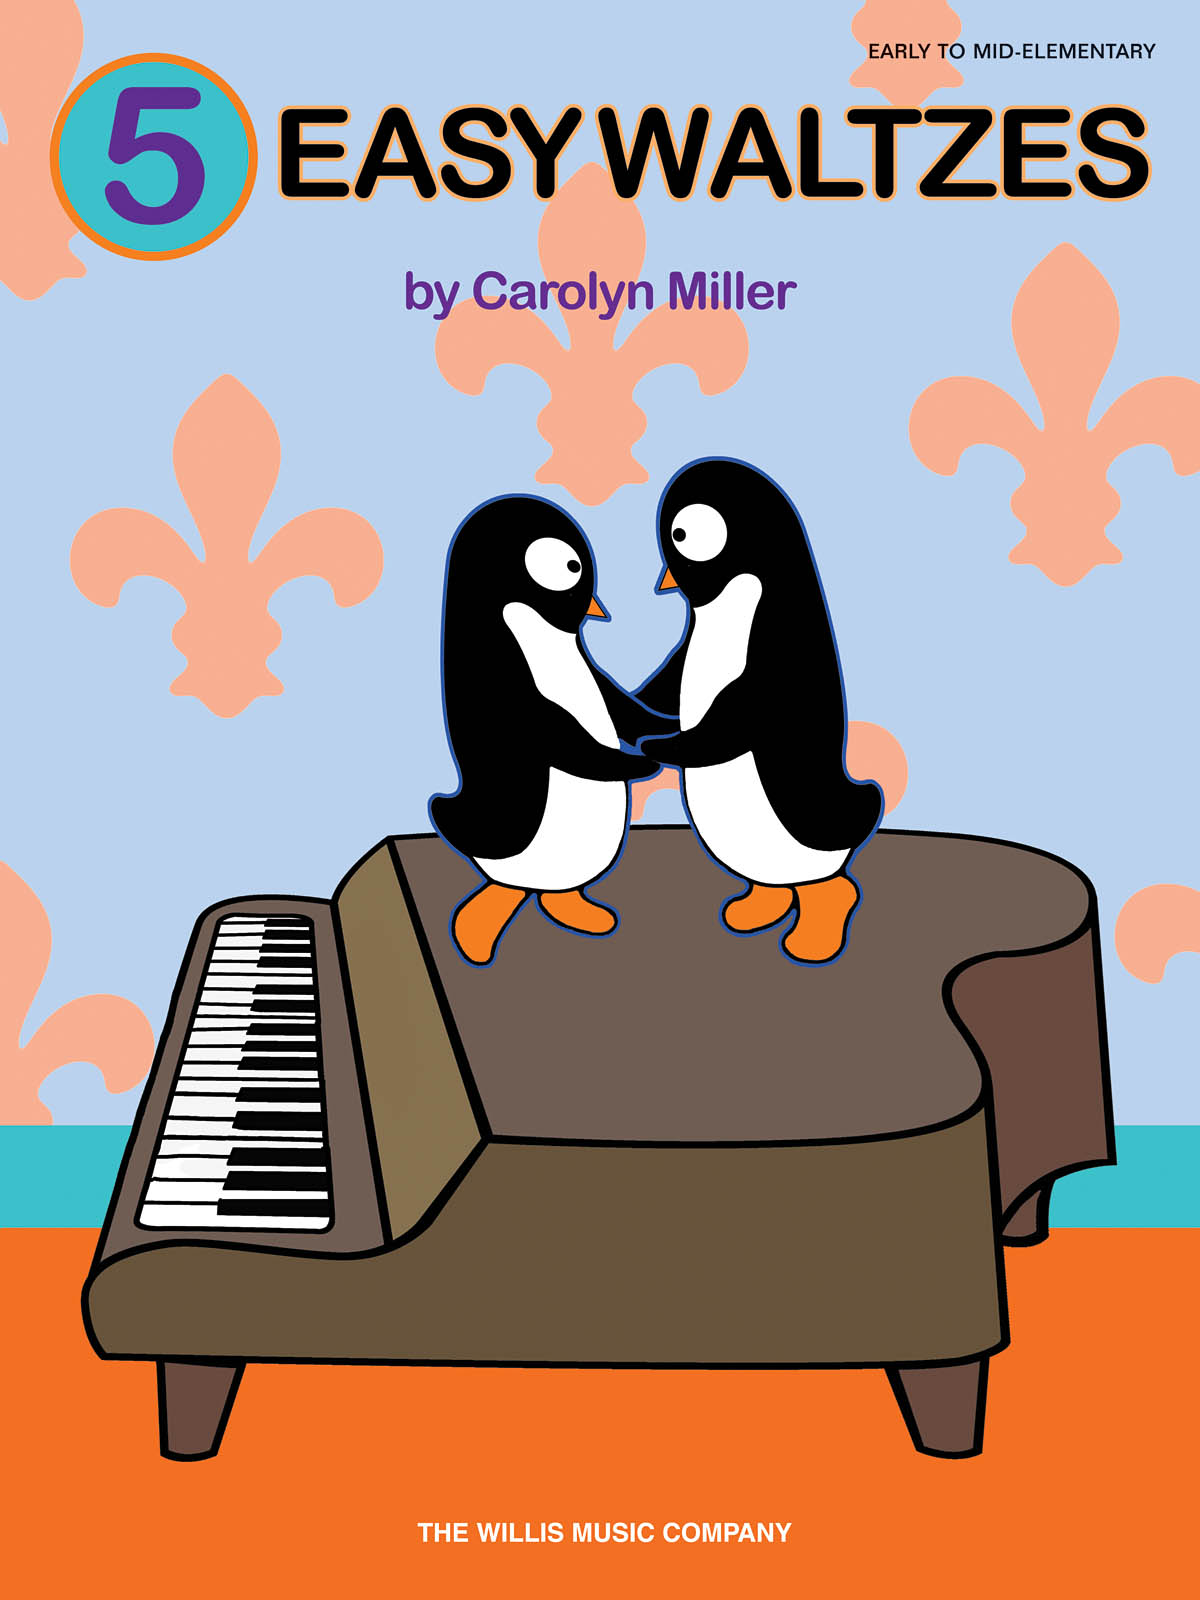 5 Easy Waltzes - Early to Mid-Elementary Level